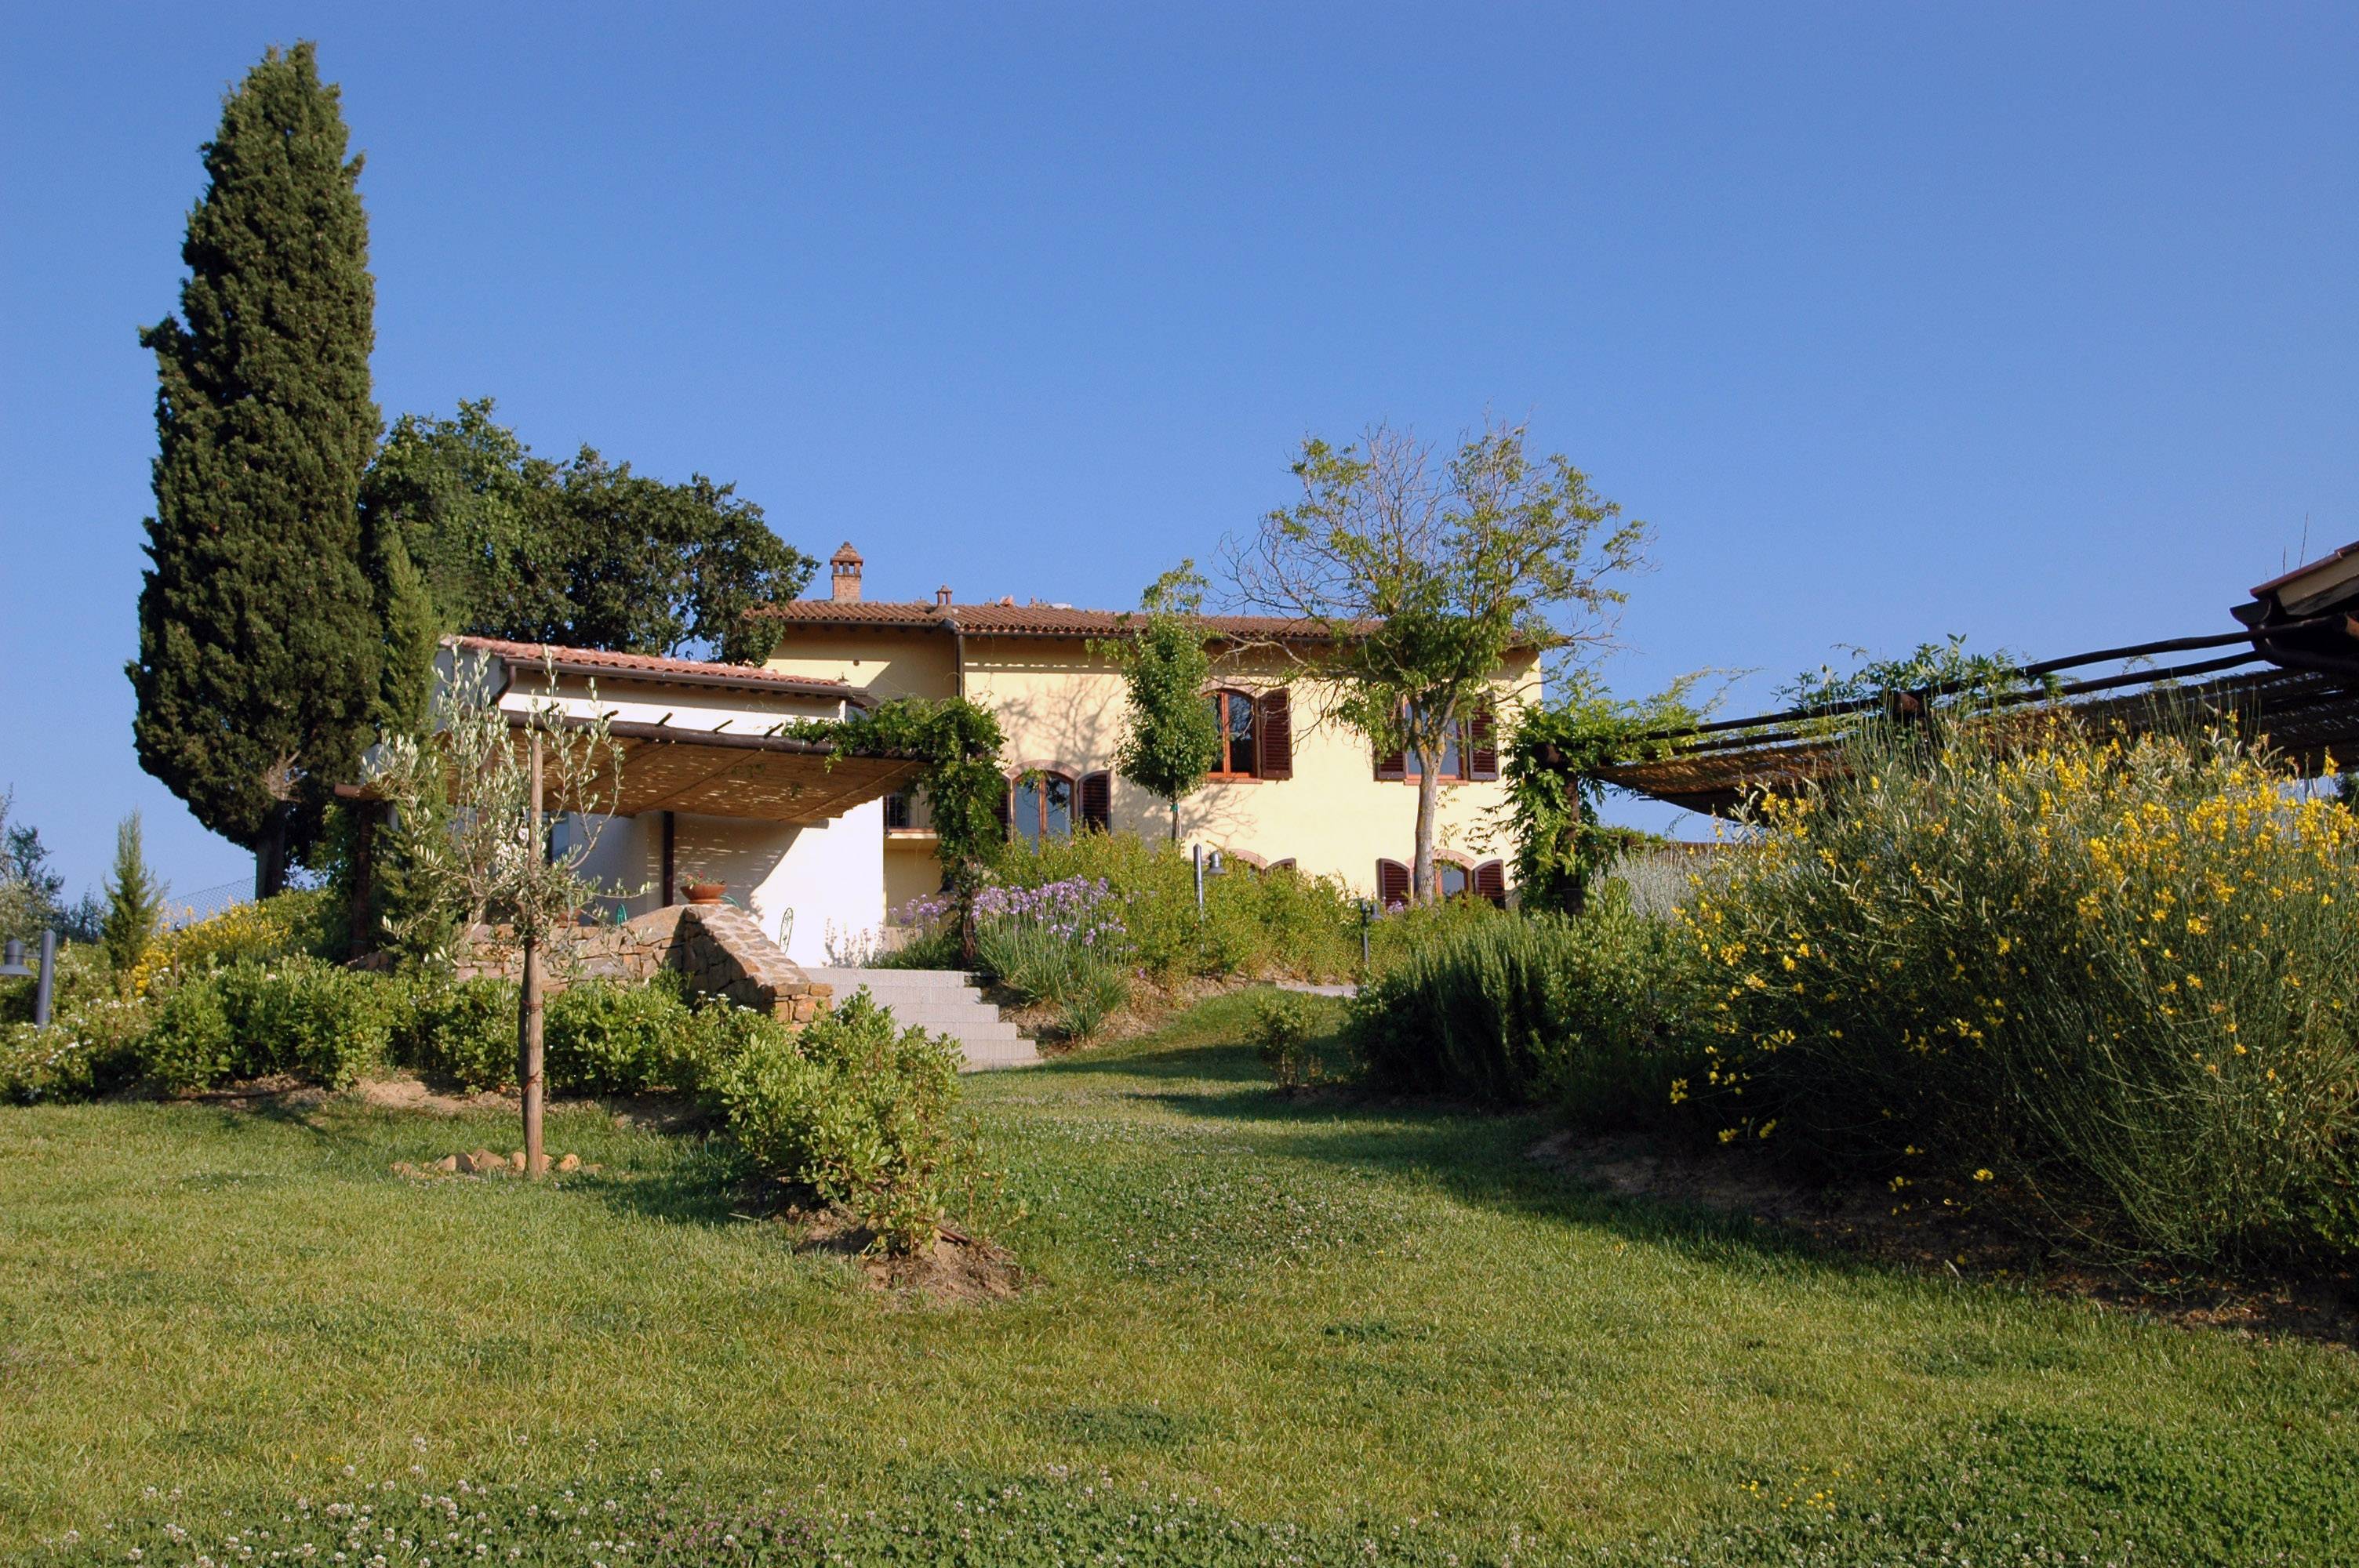 ORGANIC MODERN TUSCAN FARMHOUSE WITH 7 APARTMENTS IN THE CHIANTI VALLEY